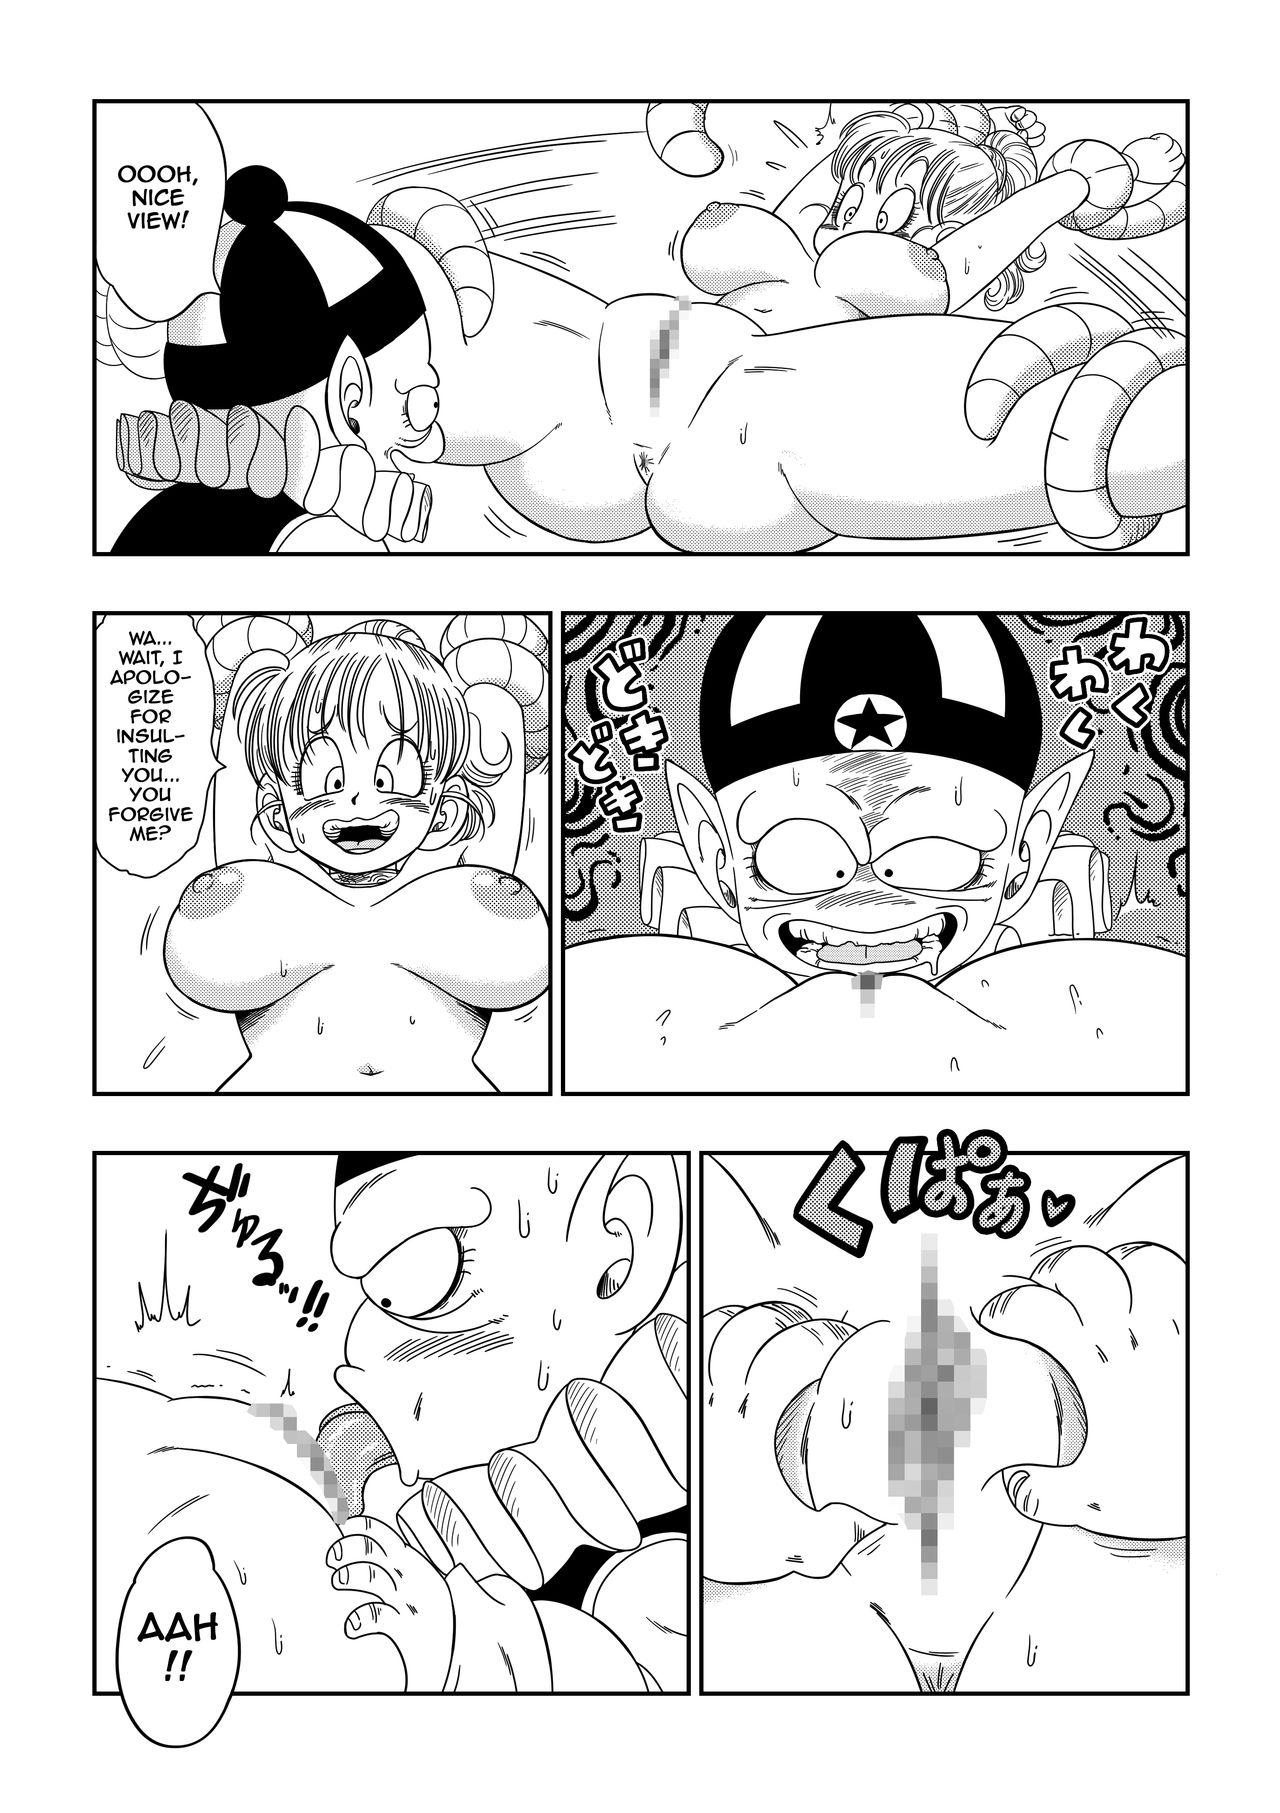 Bisex Dagon Ball - Punishment in Pilaf's Castle - Dragon ball Wrestling - Page 6